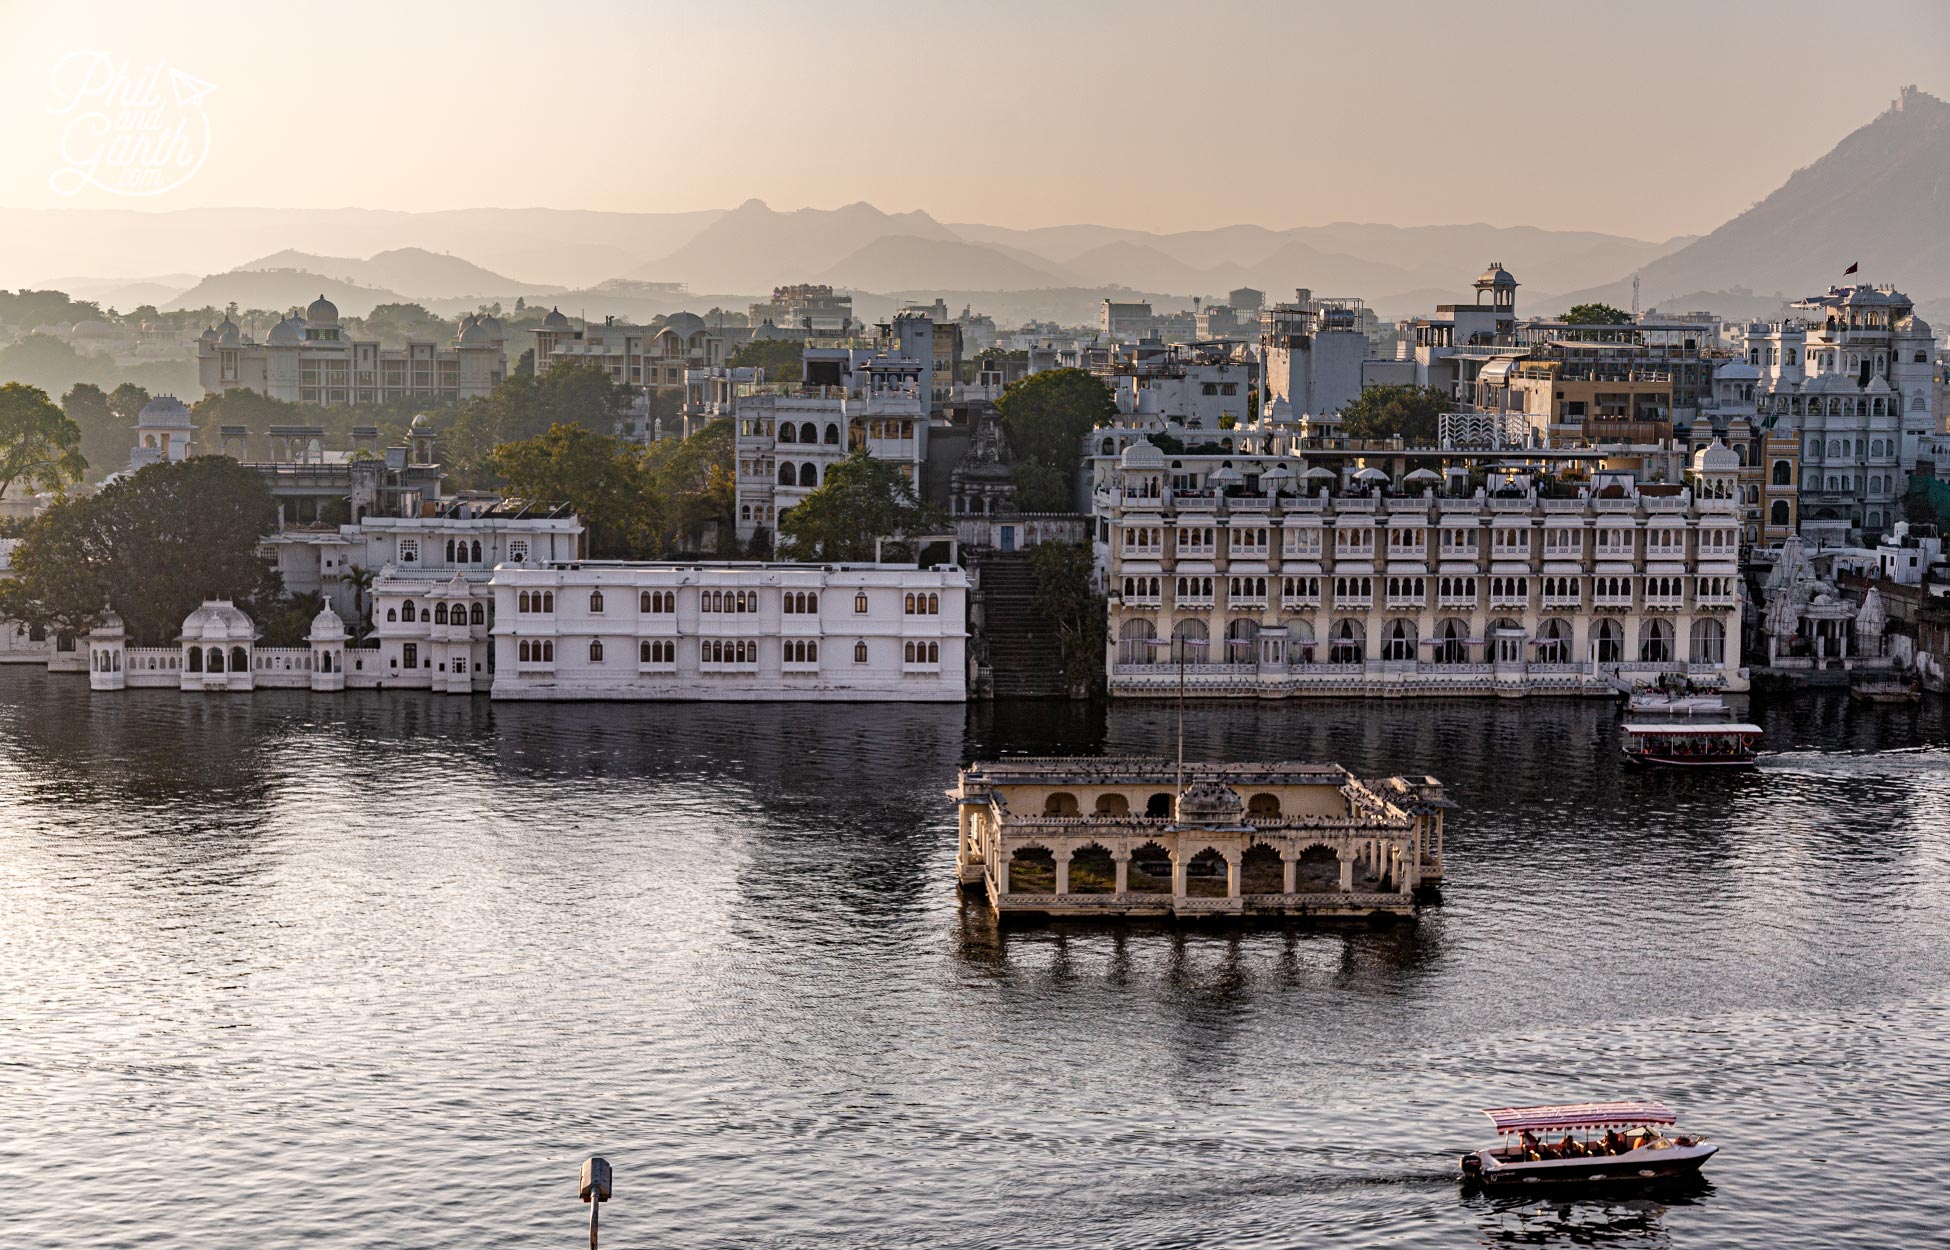 Udaipur was founded in 1559 by Maharana Udai Singh II. Some people call it the ‘Venice of India’